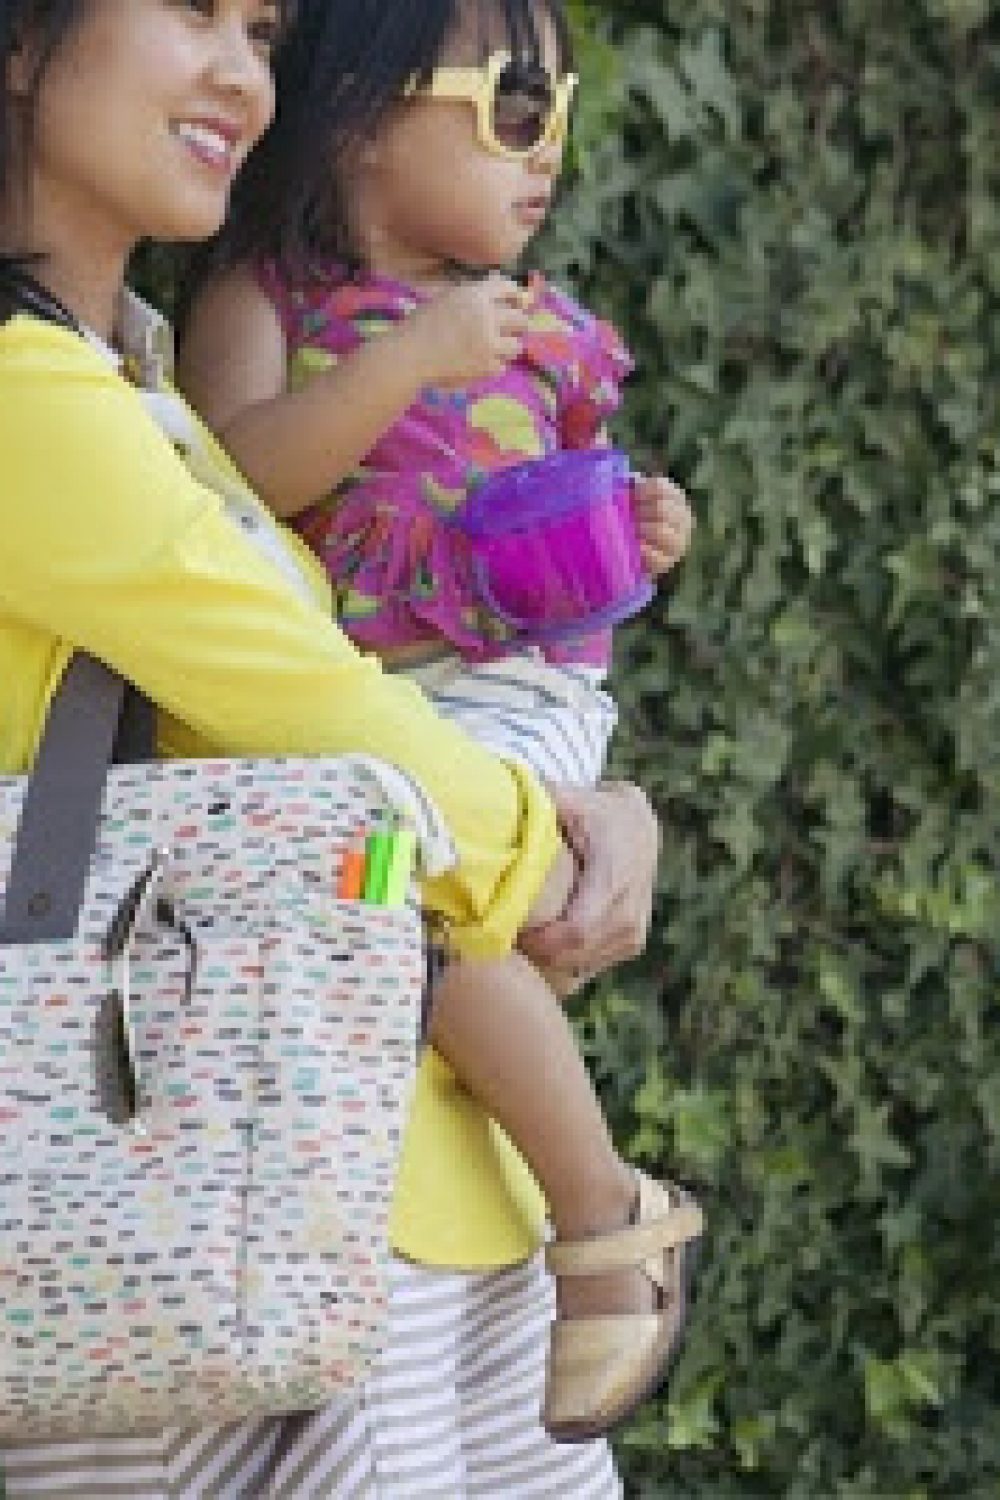 Introducing FEED Diaper Bags: Because Everyone Should Experience theJoy of Motherhood.